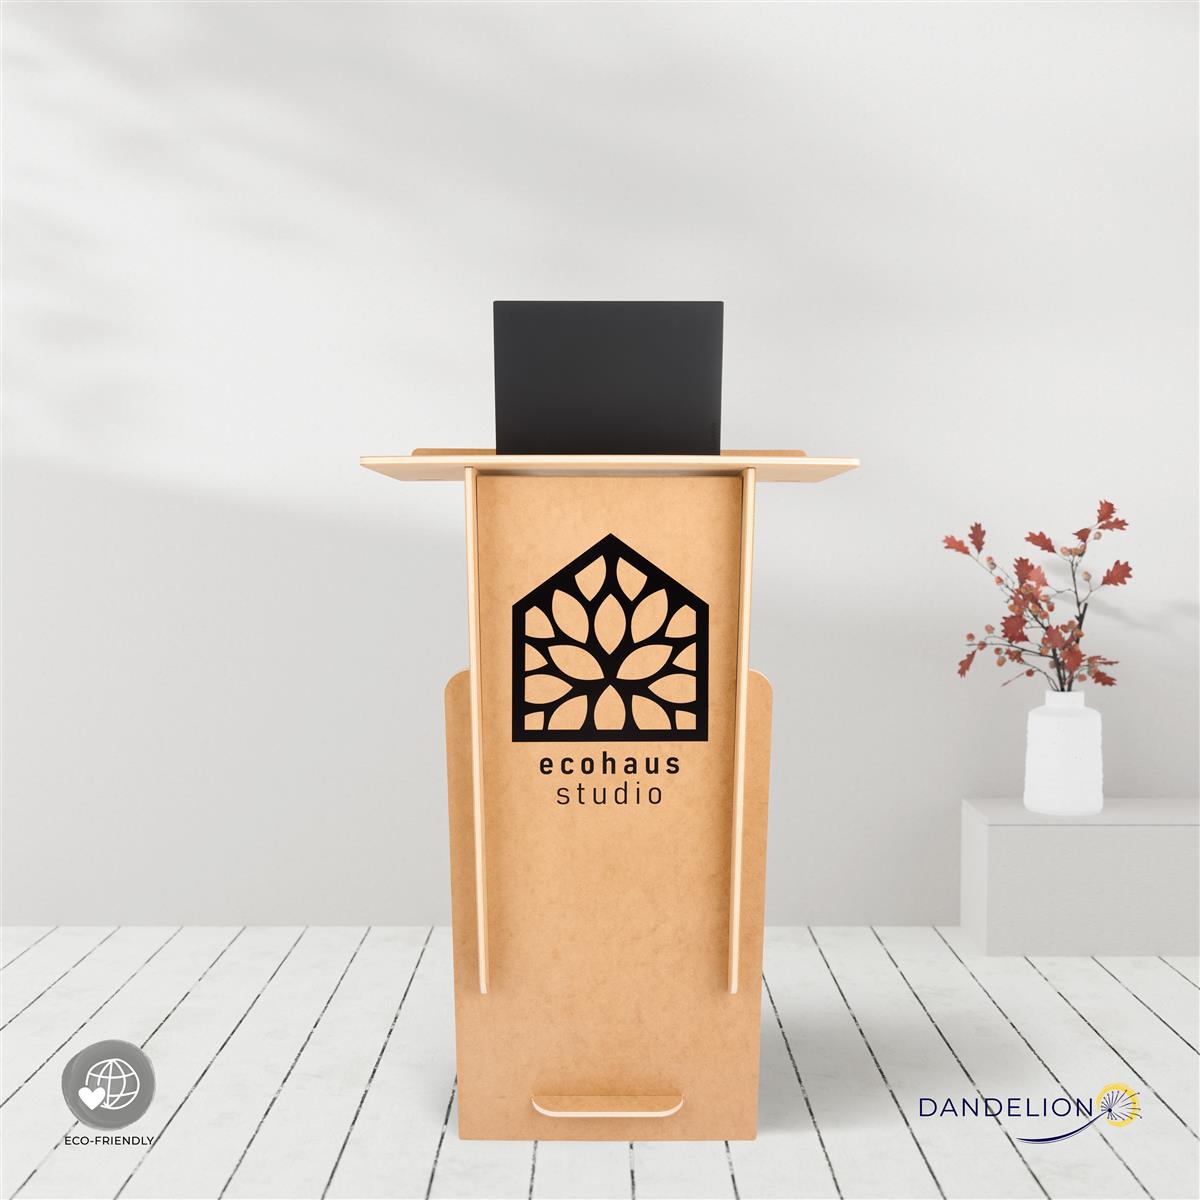 Collapsible podium with custom graphics with knockdown design